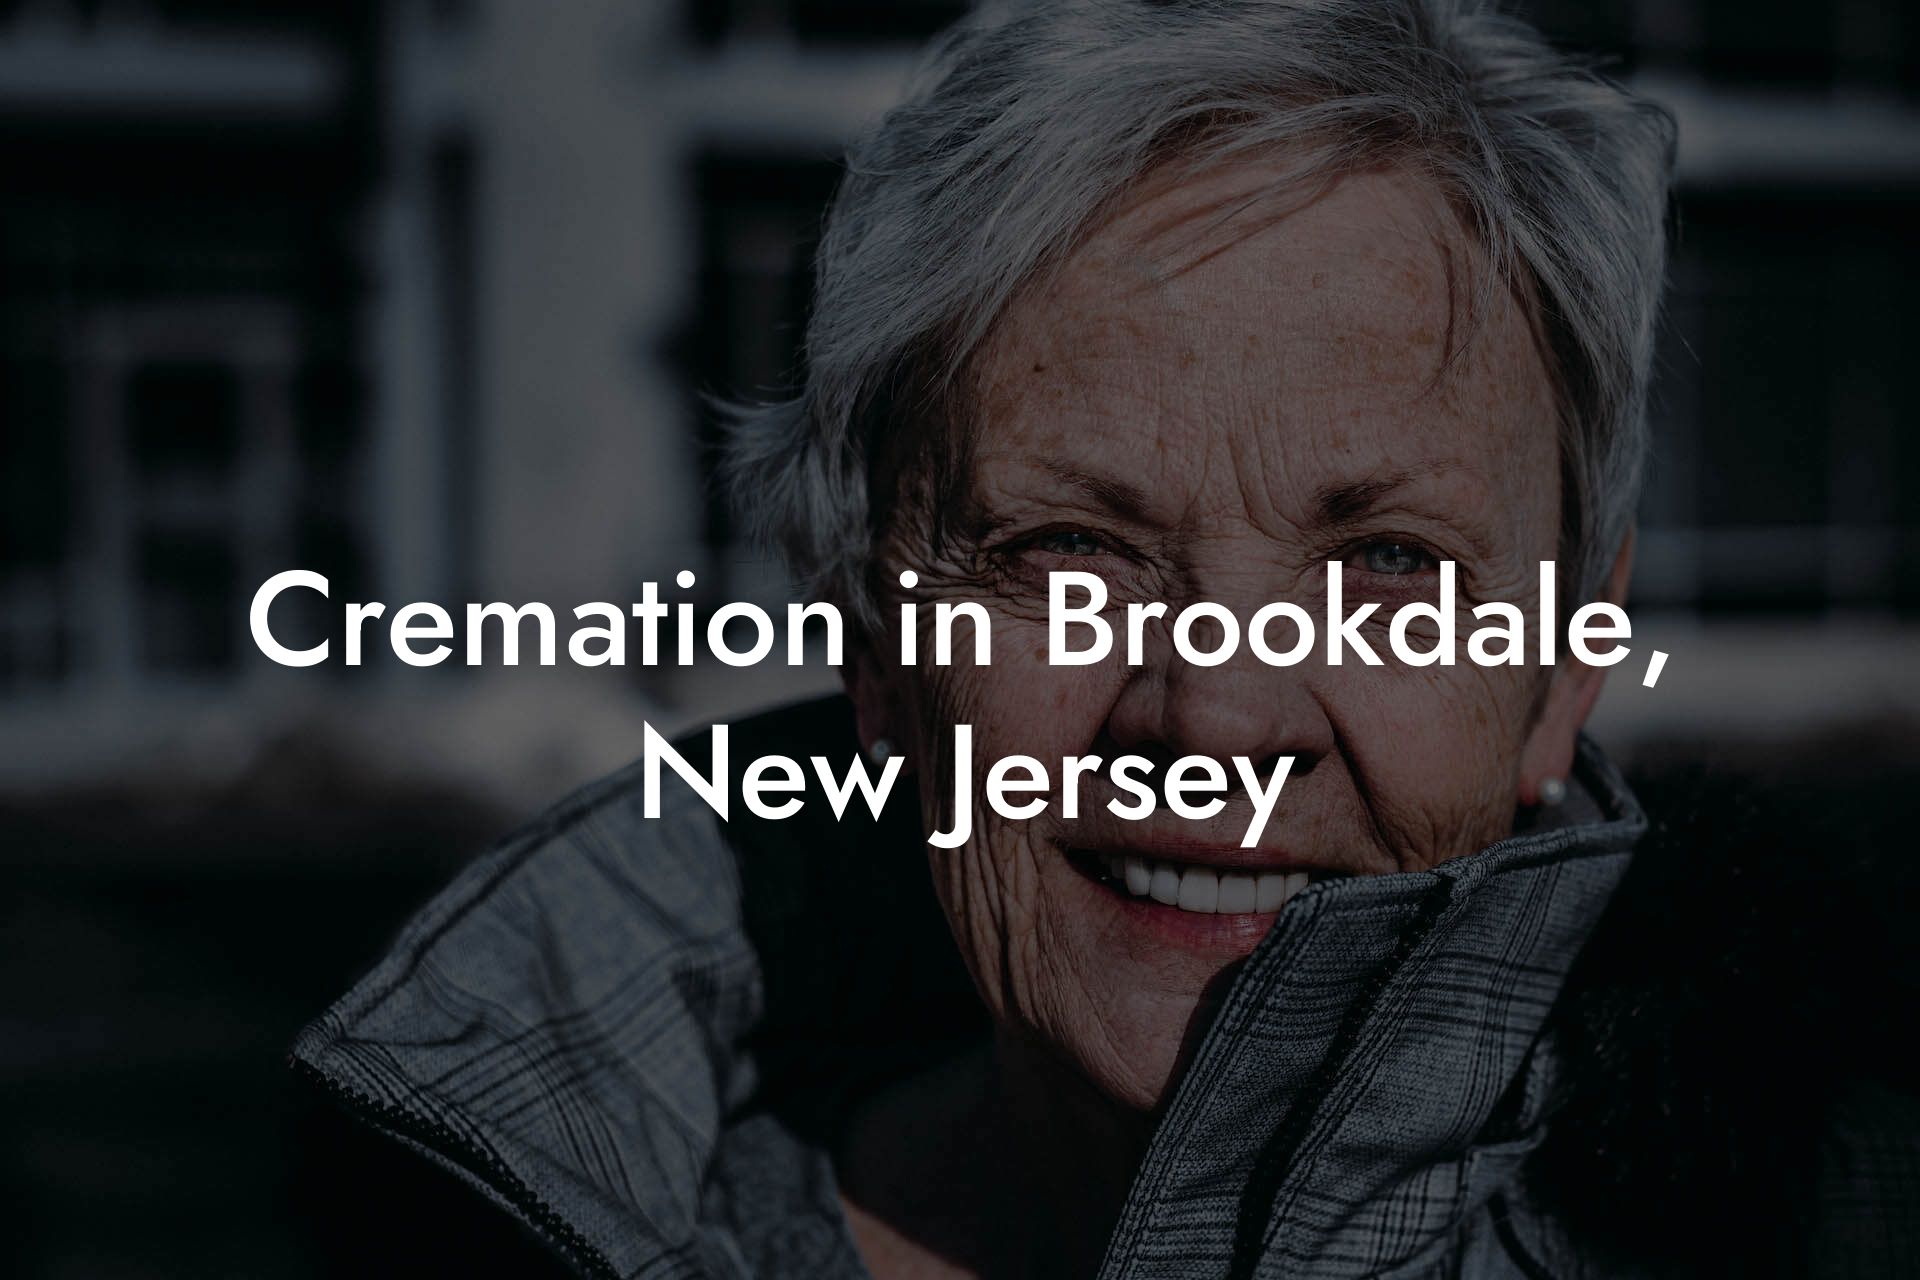 Cremation in Brookdale, New Jersey